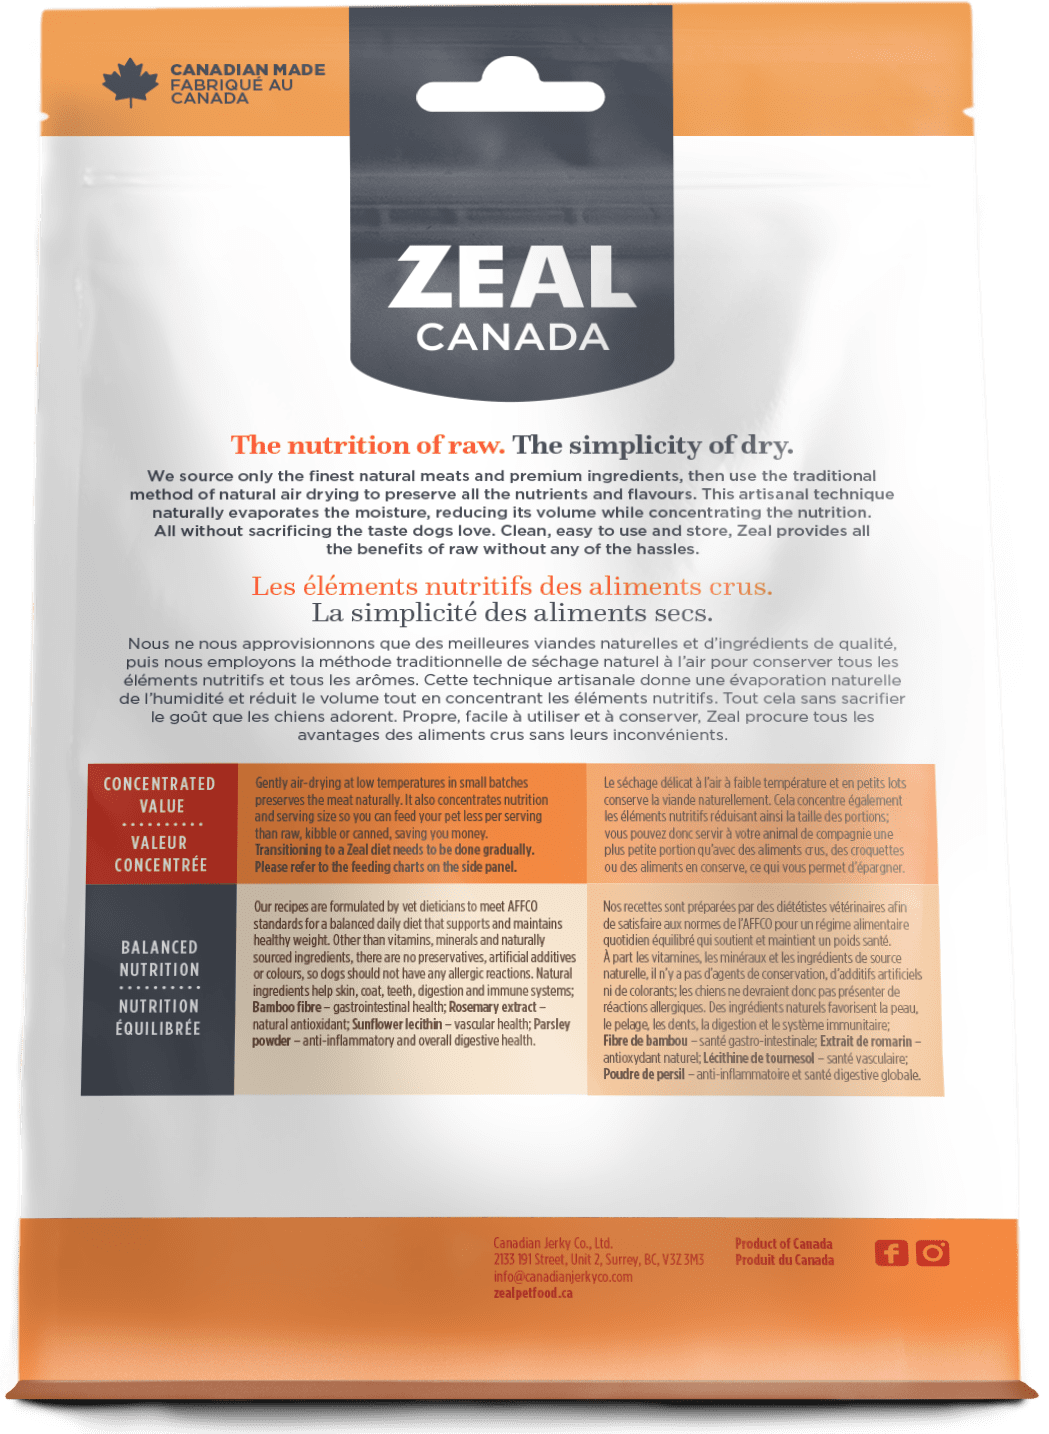 Zeal Gently Air-Dried Pork for Dogs